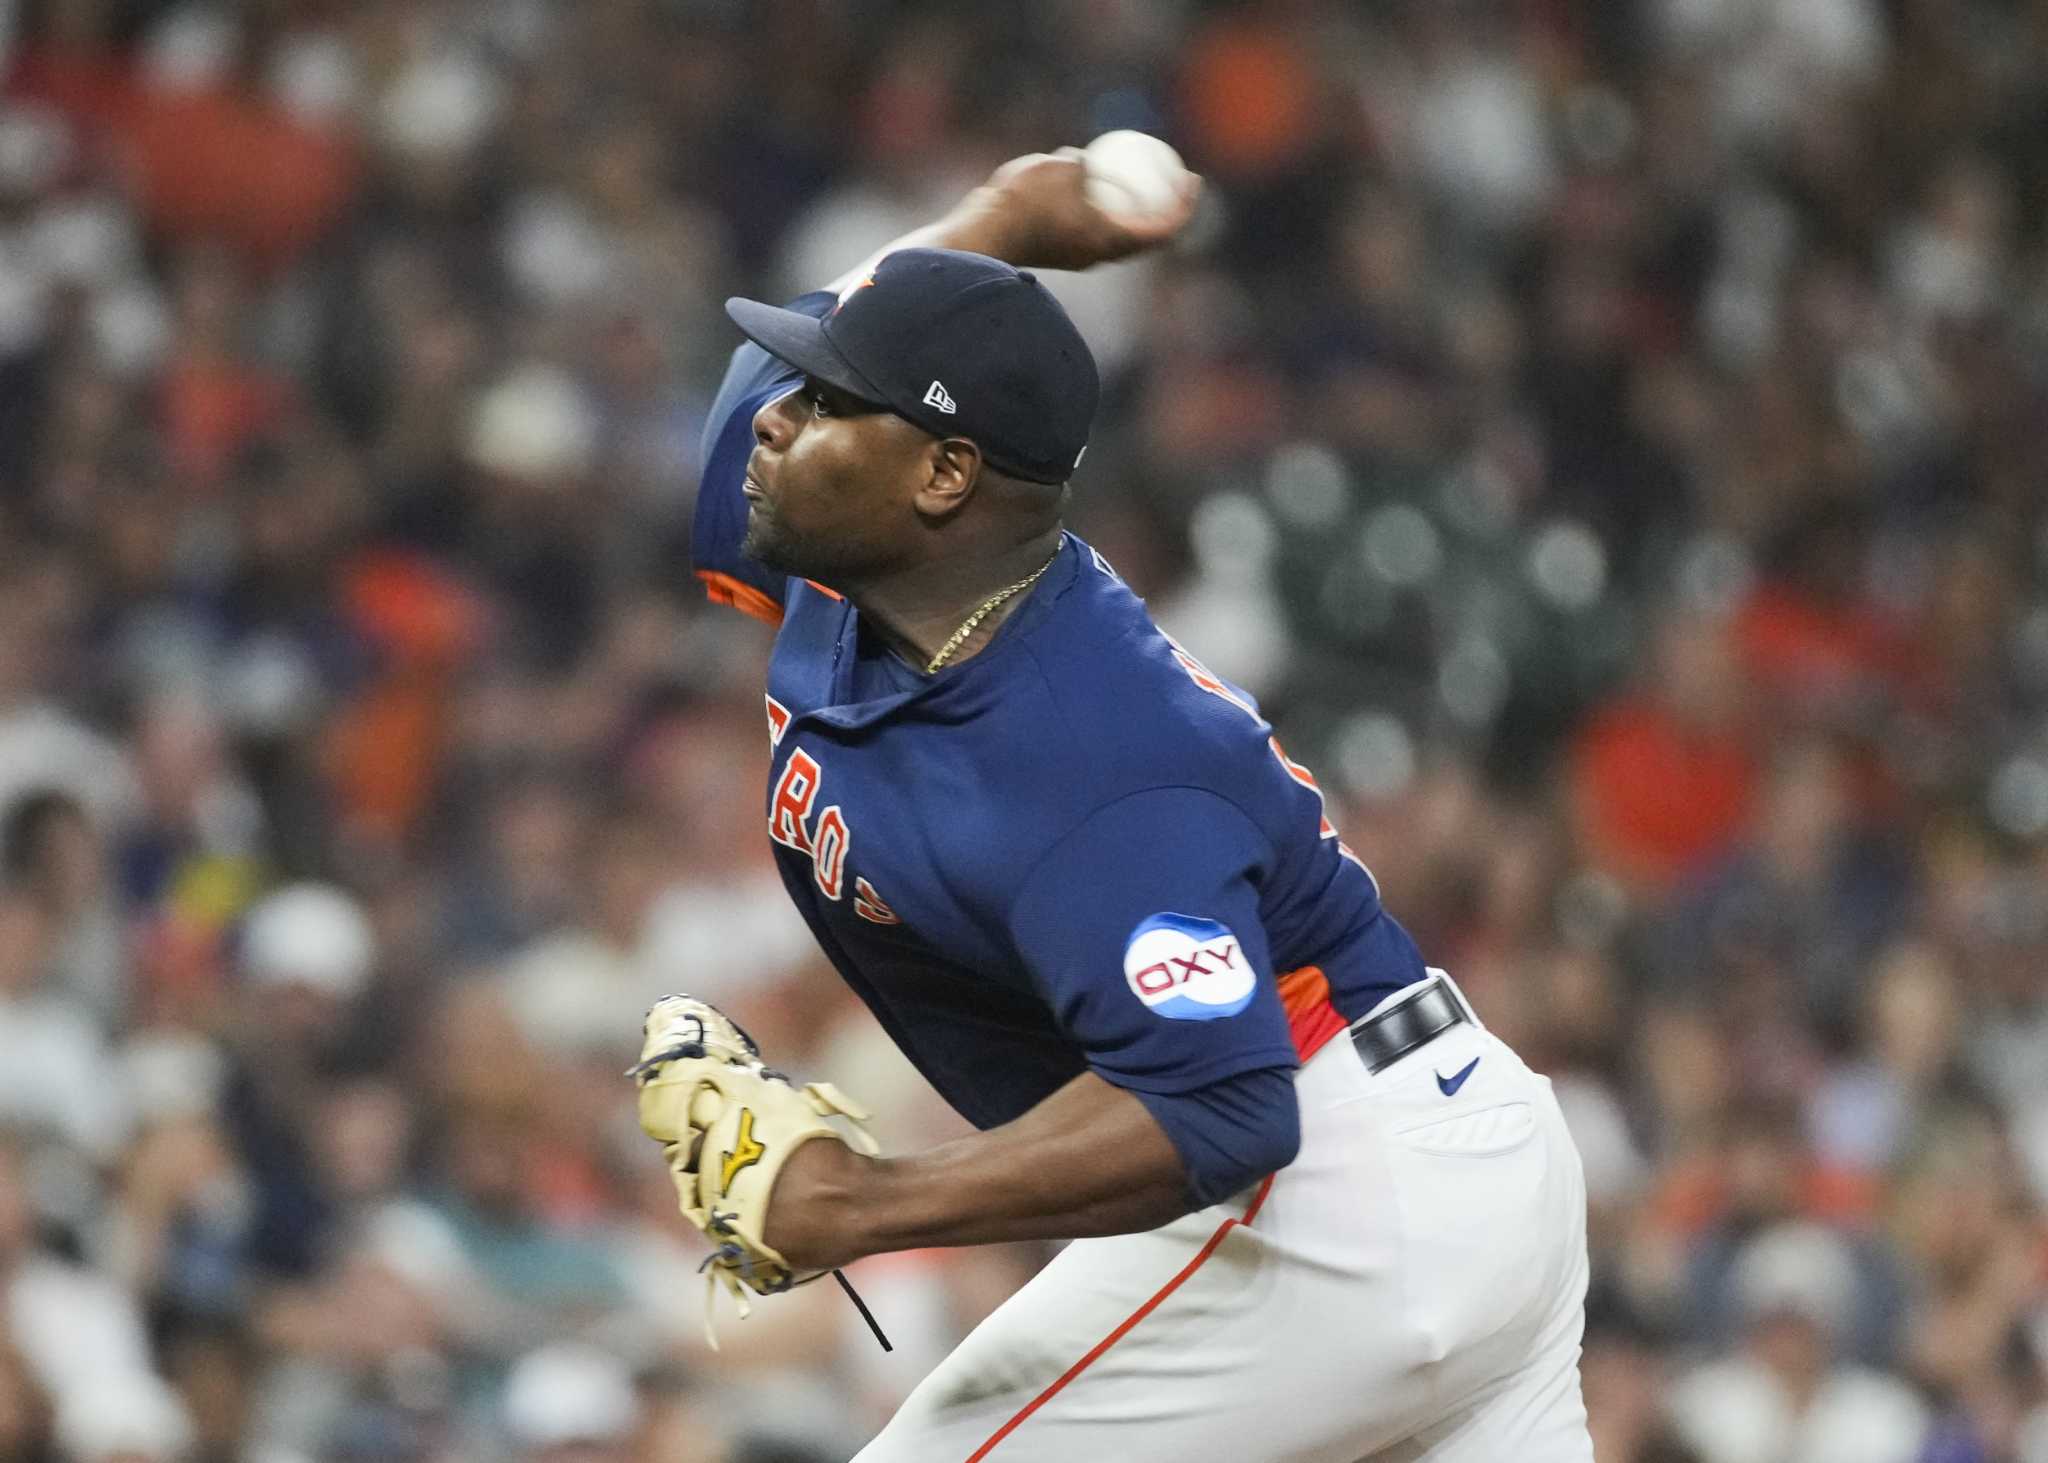 Houston Astros: Reliever Hector Neris is using his splitter less